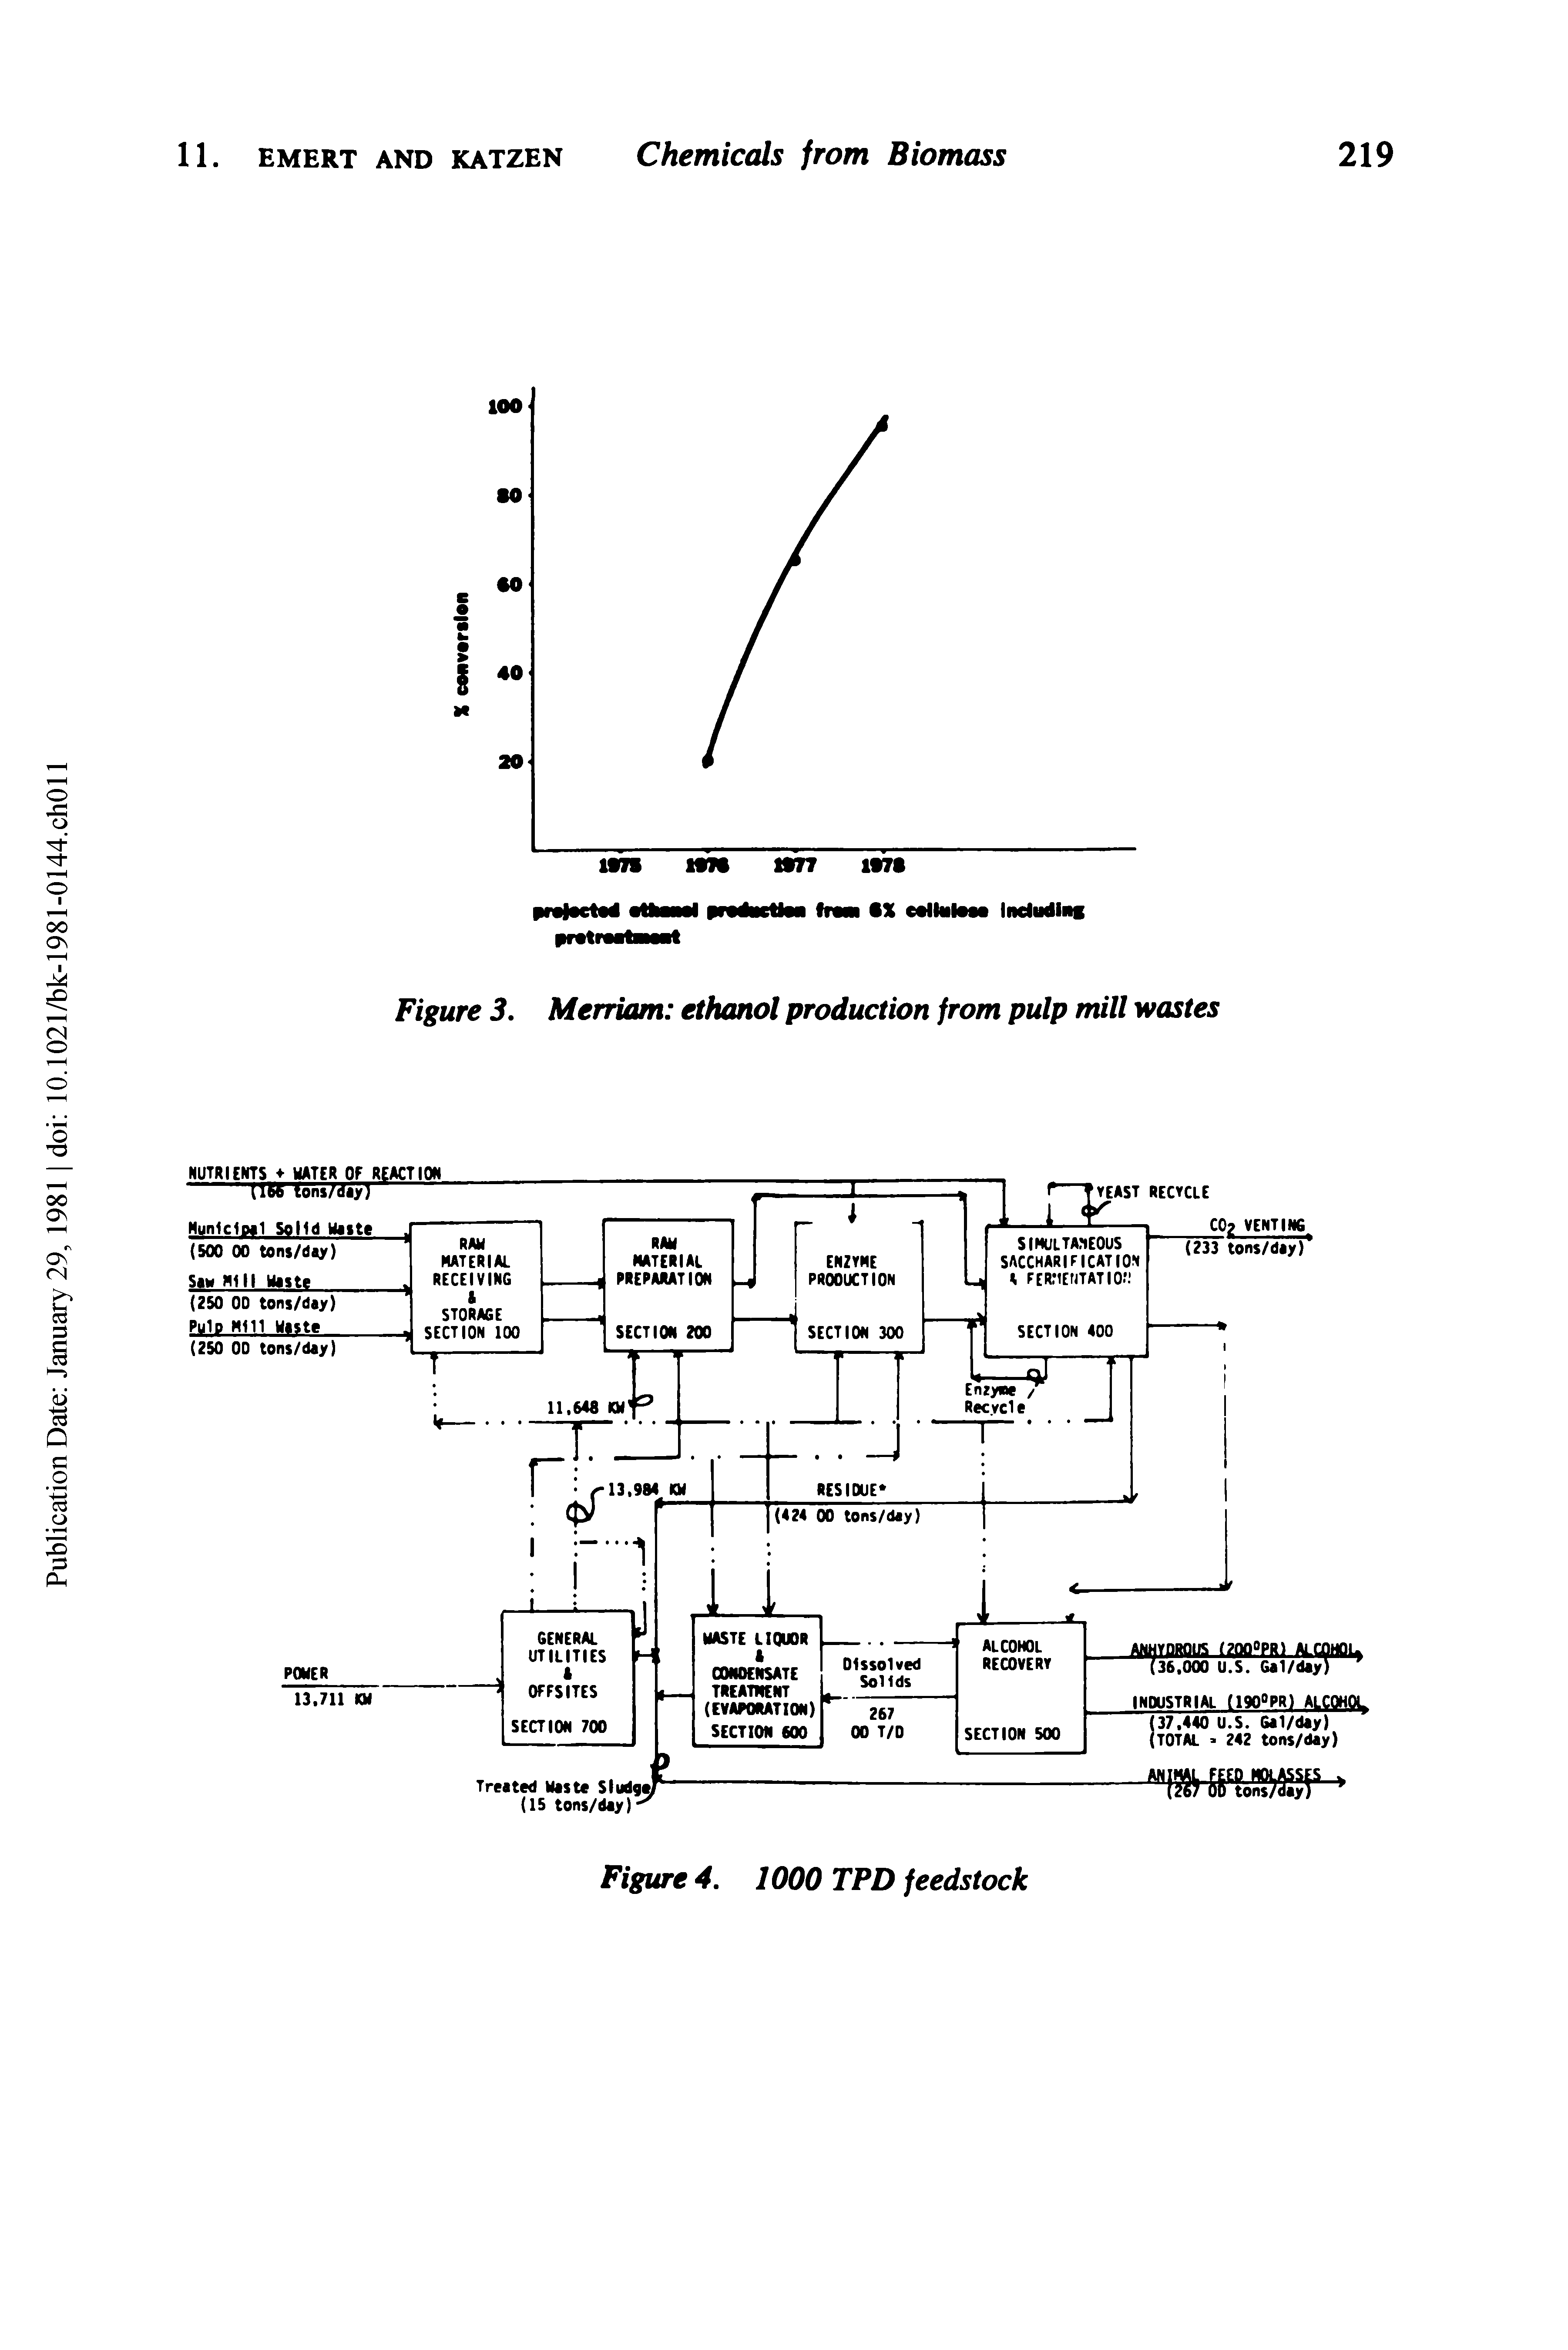 Figure 3. Merriam ethanol production from pulp mill wastes...